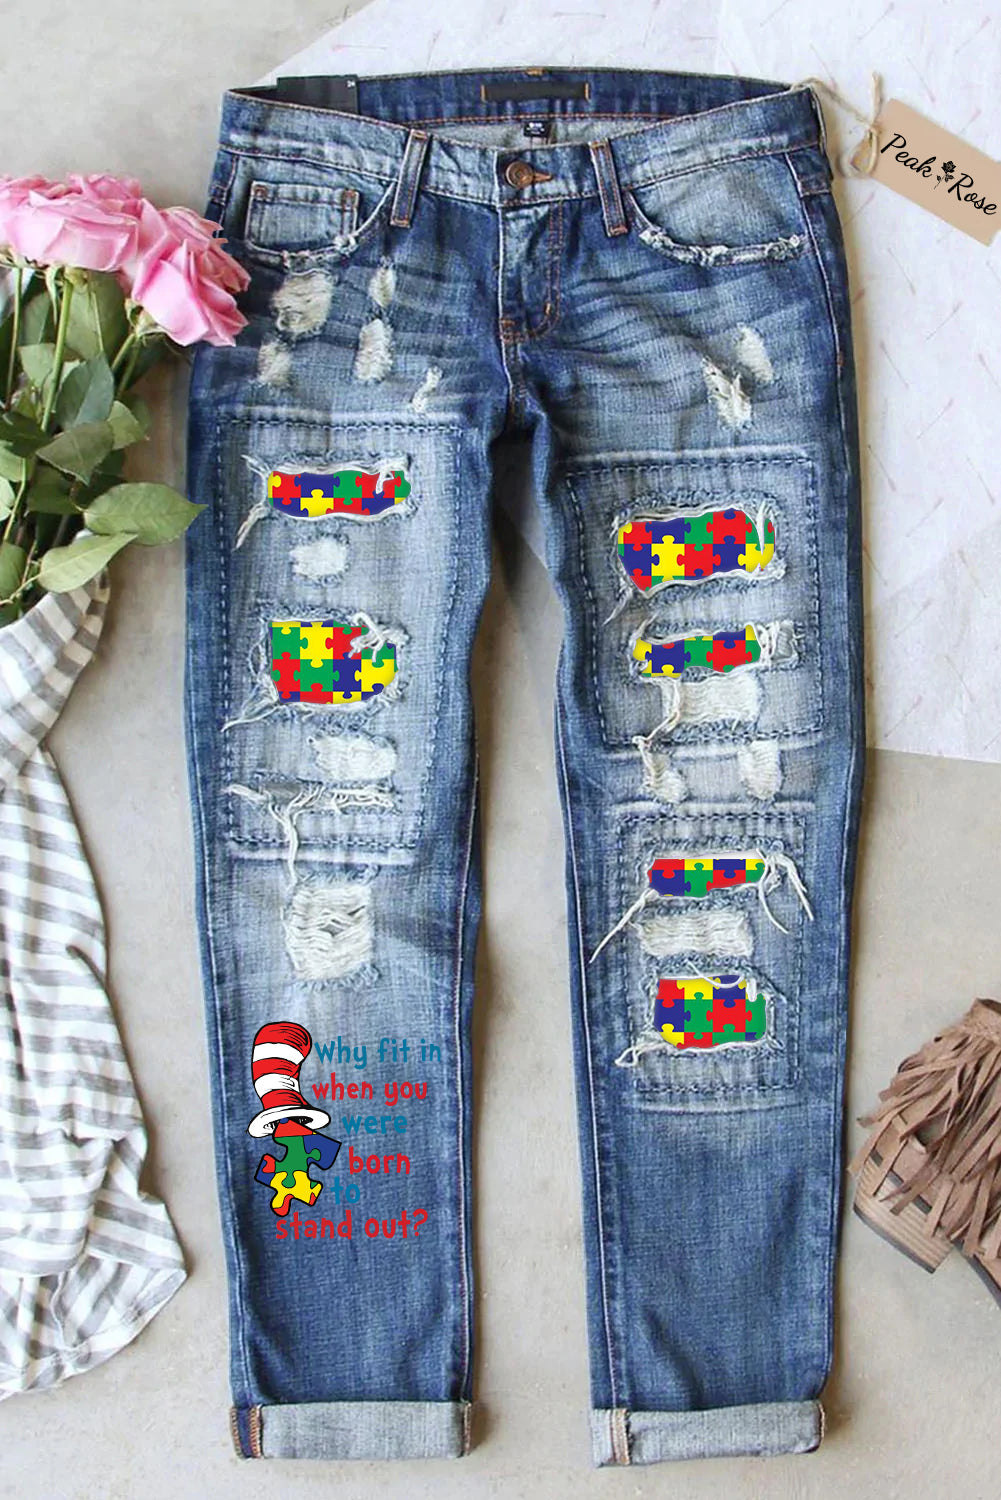 Why Fit In When You Were Born To Stand Out Print Ripped Denim Jeans